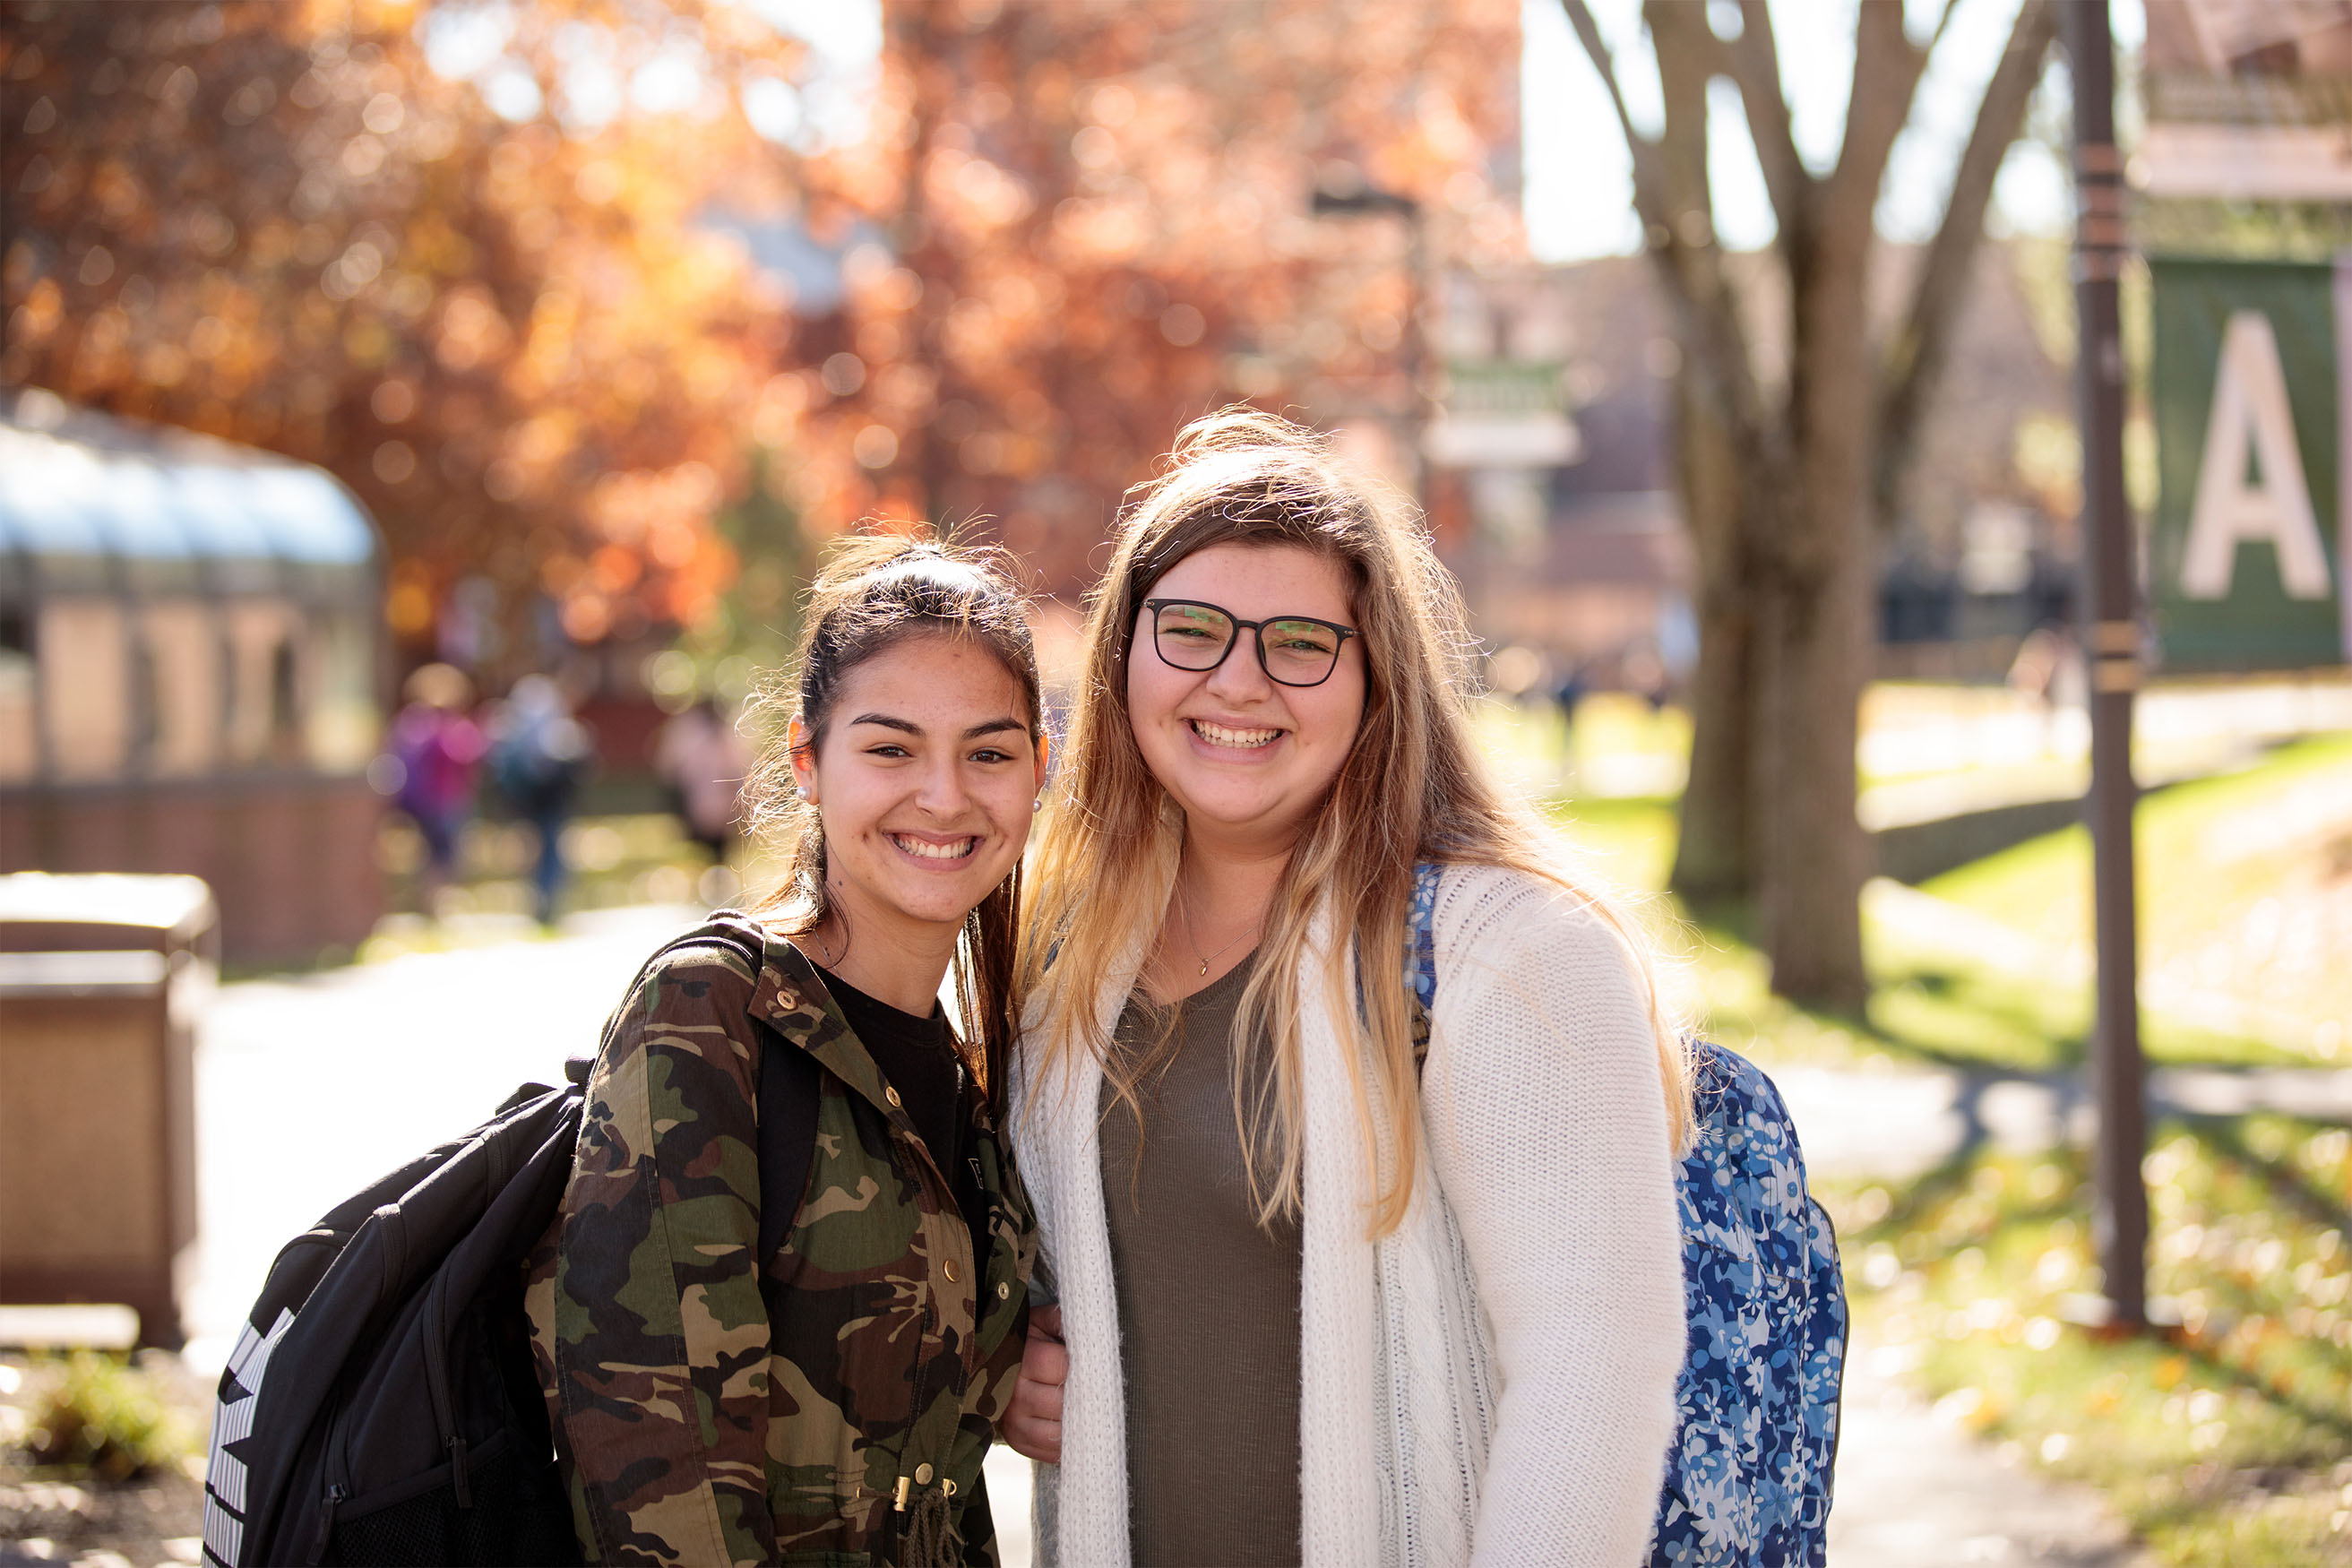 Students on the Fall River campus